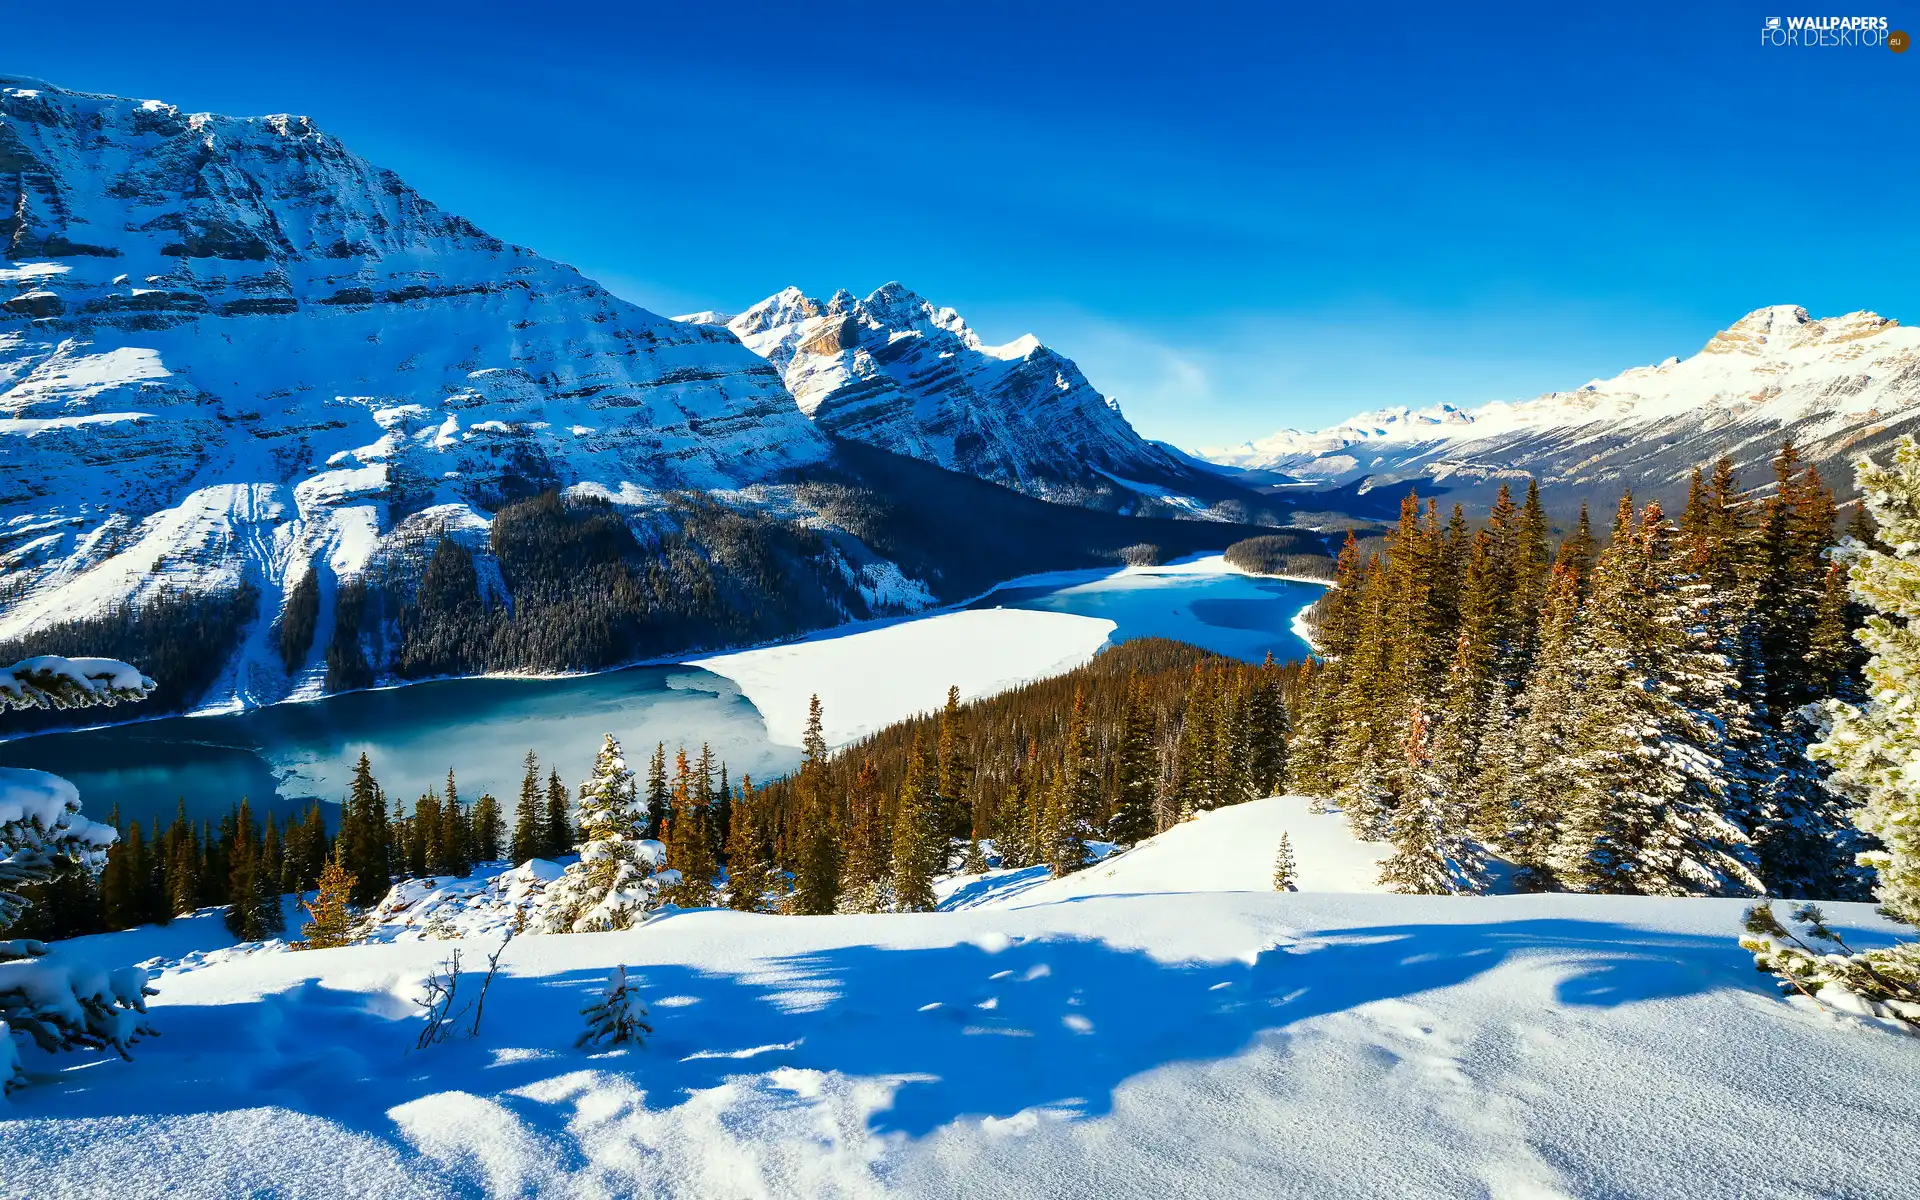 Banff National Park, Mountains Canadian Rockies, Canada, woods, viewes, Peyto Lake, winter, trees